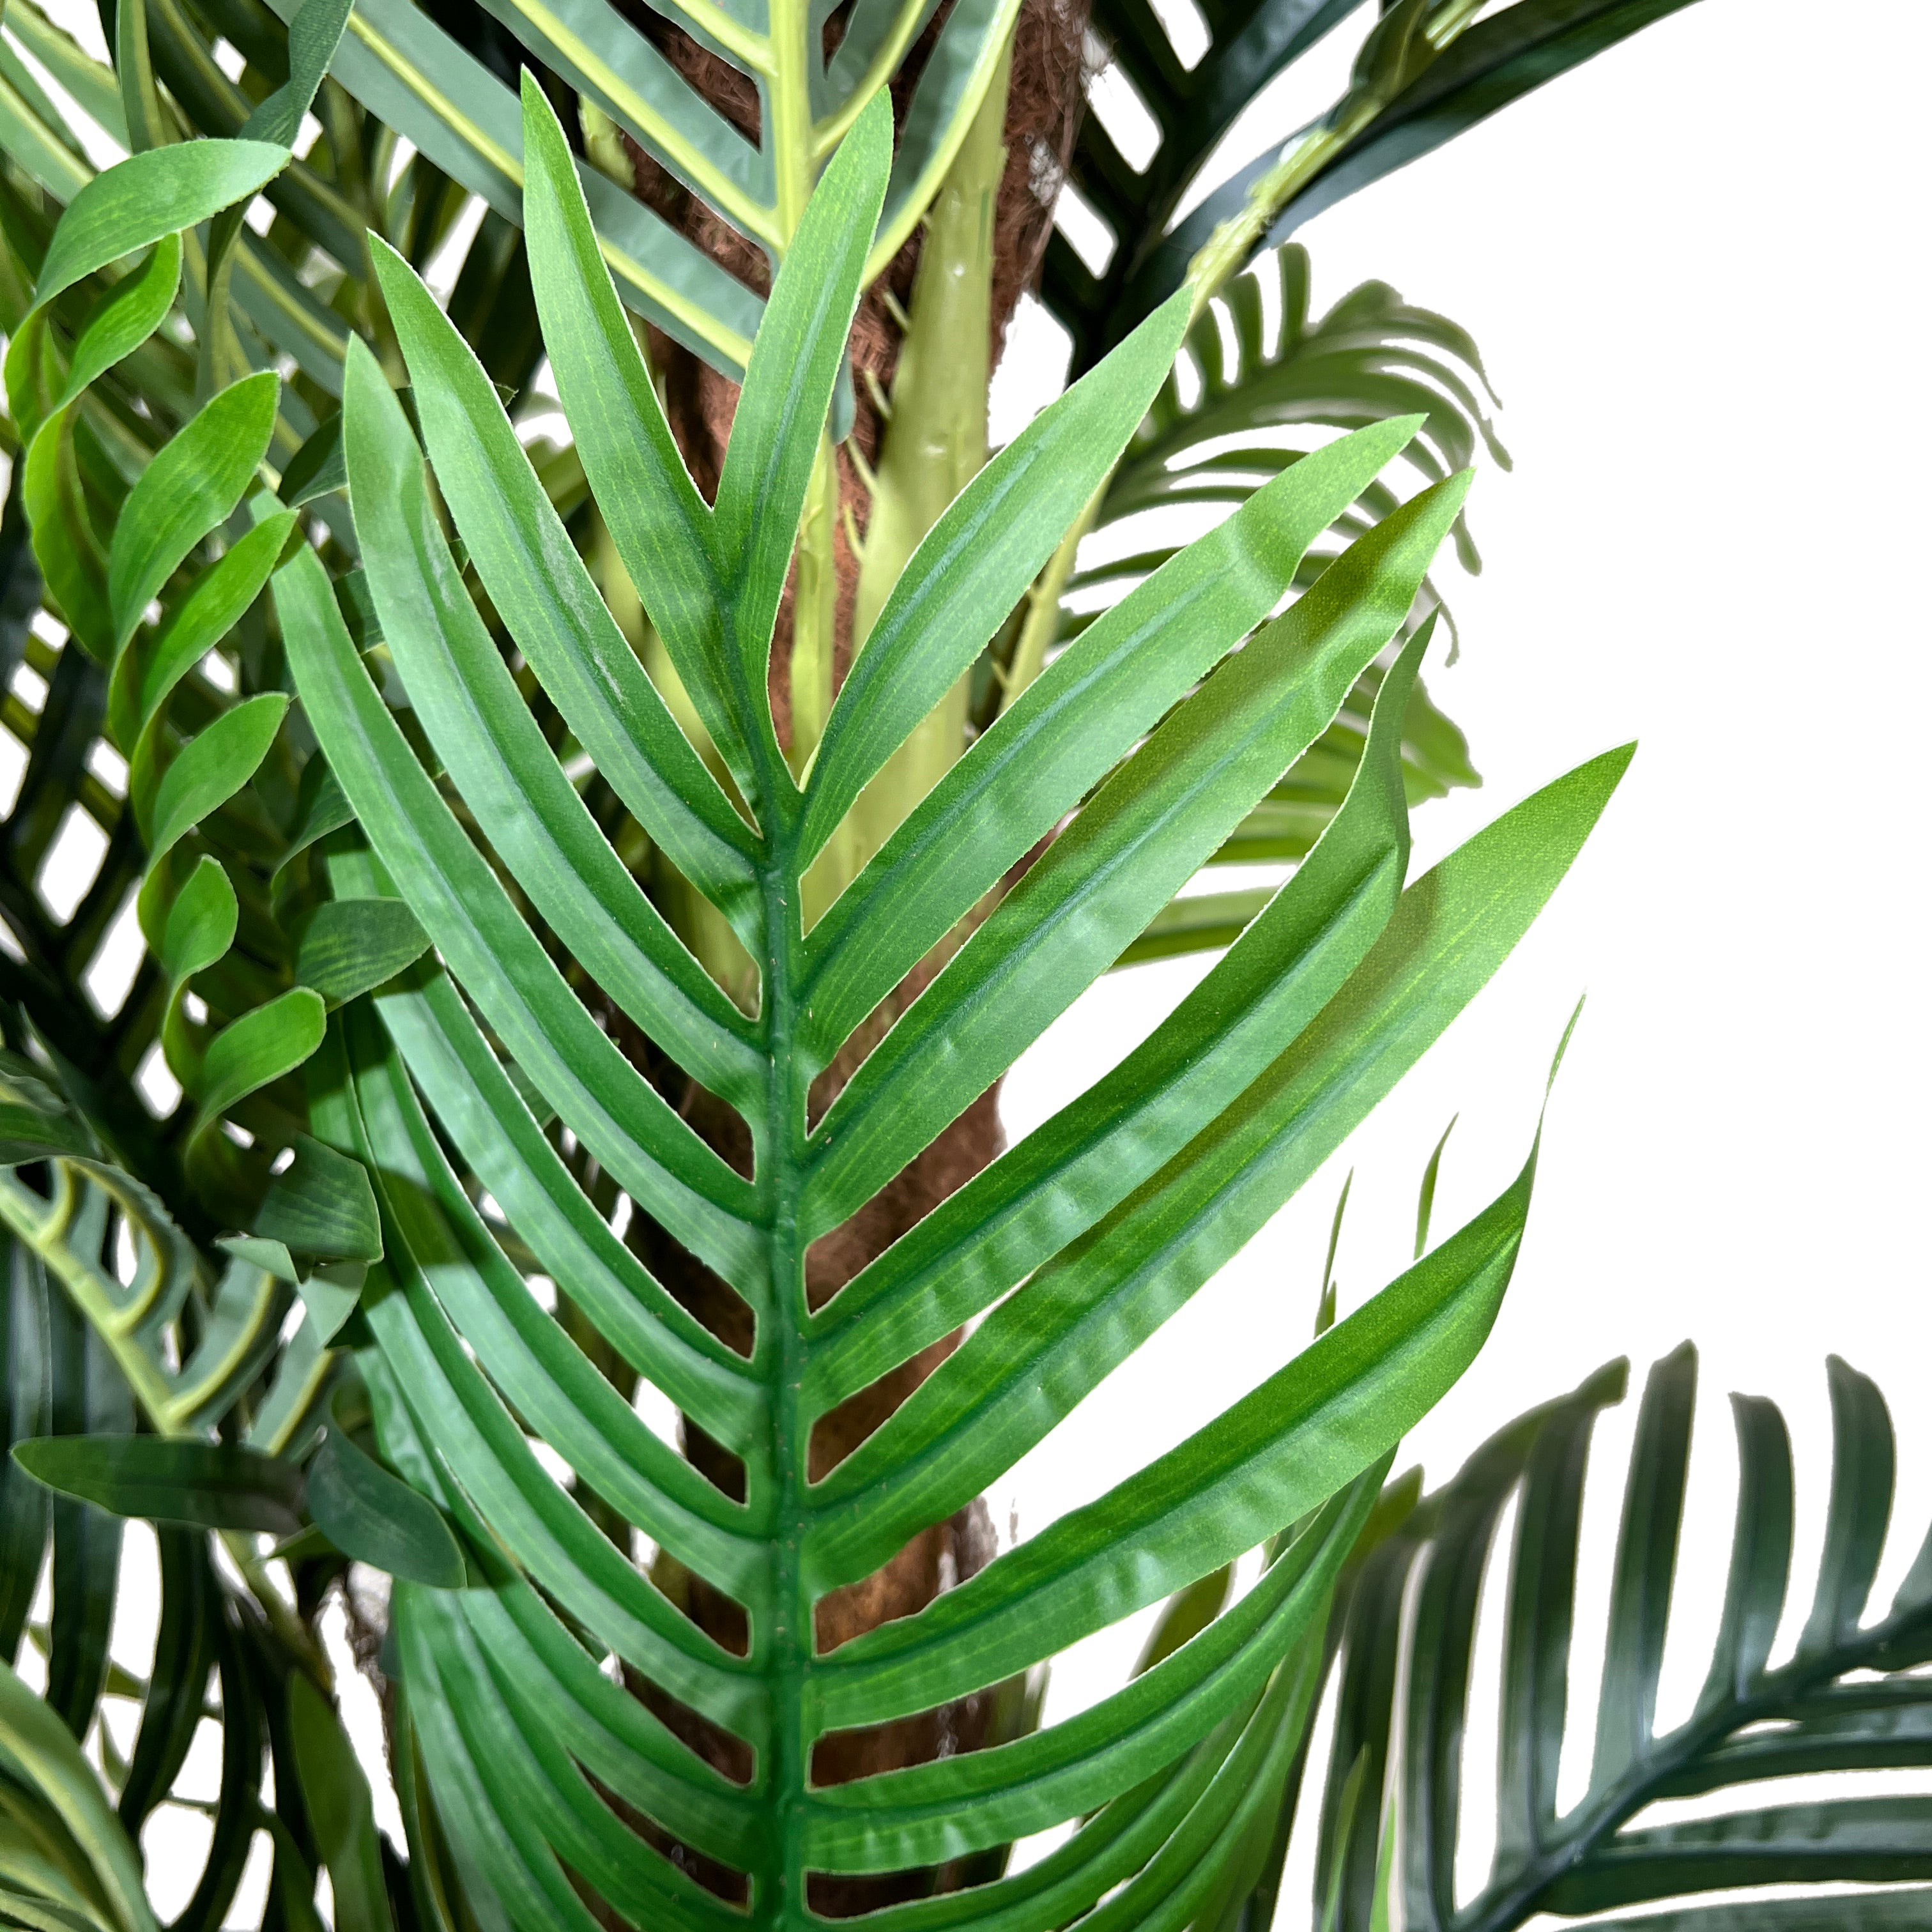 Kopu® Kunstplant Arecapalm 130 cm 3 Stammen - Real Touch - Goudpalm